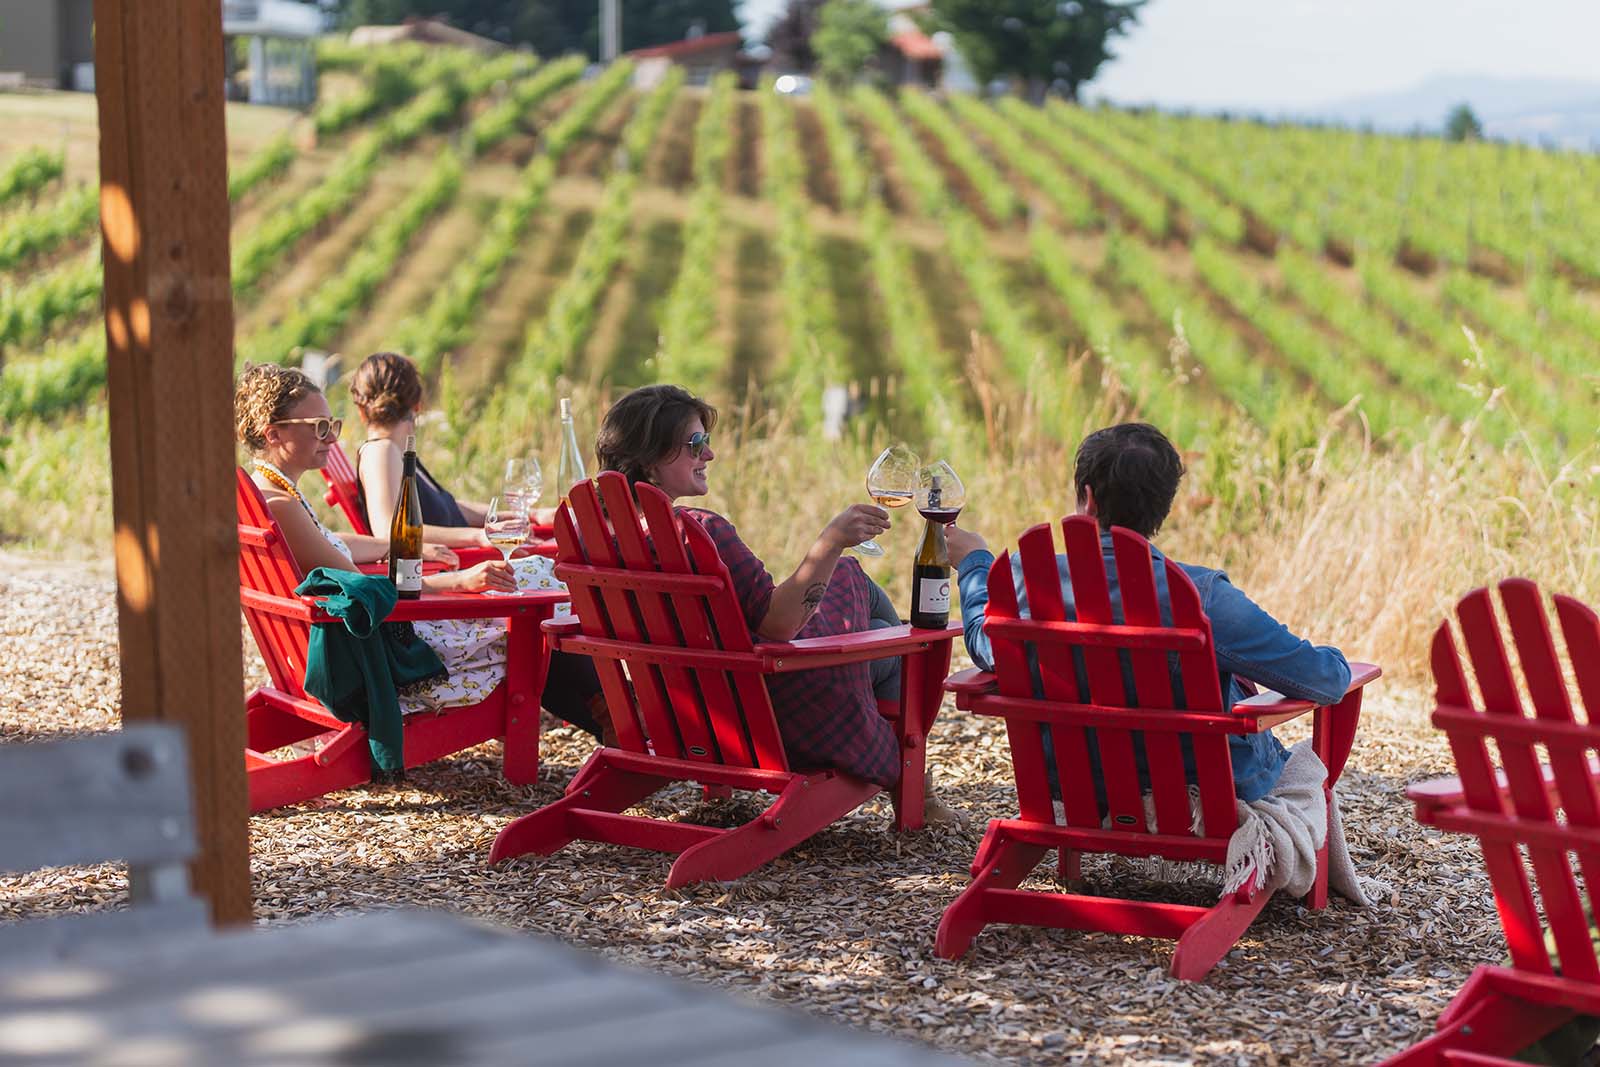 A group of friends sitting in red adirondack chairs overlooking the Brooks vineyard